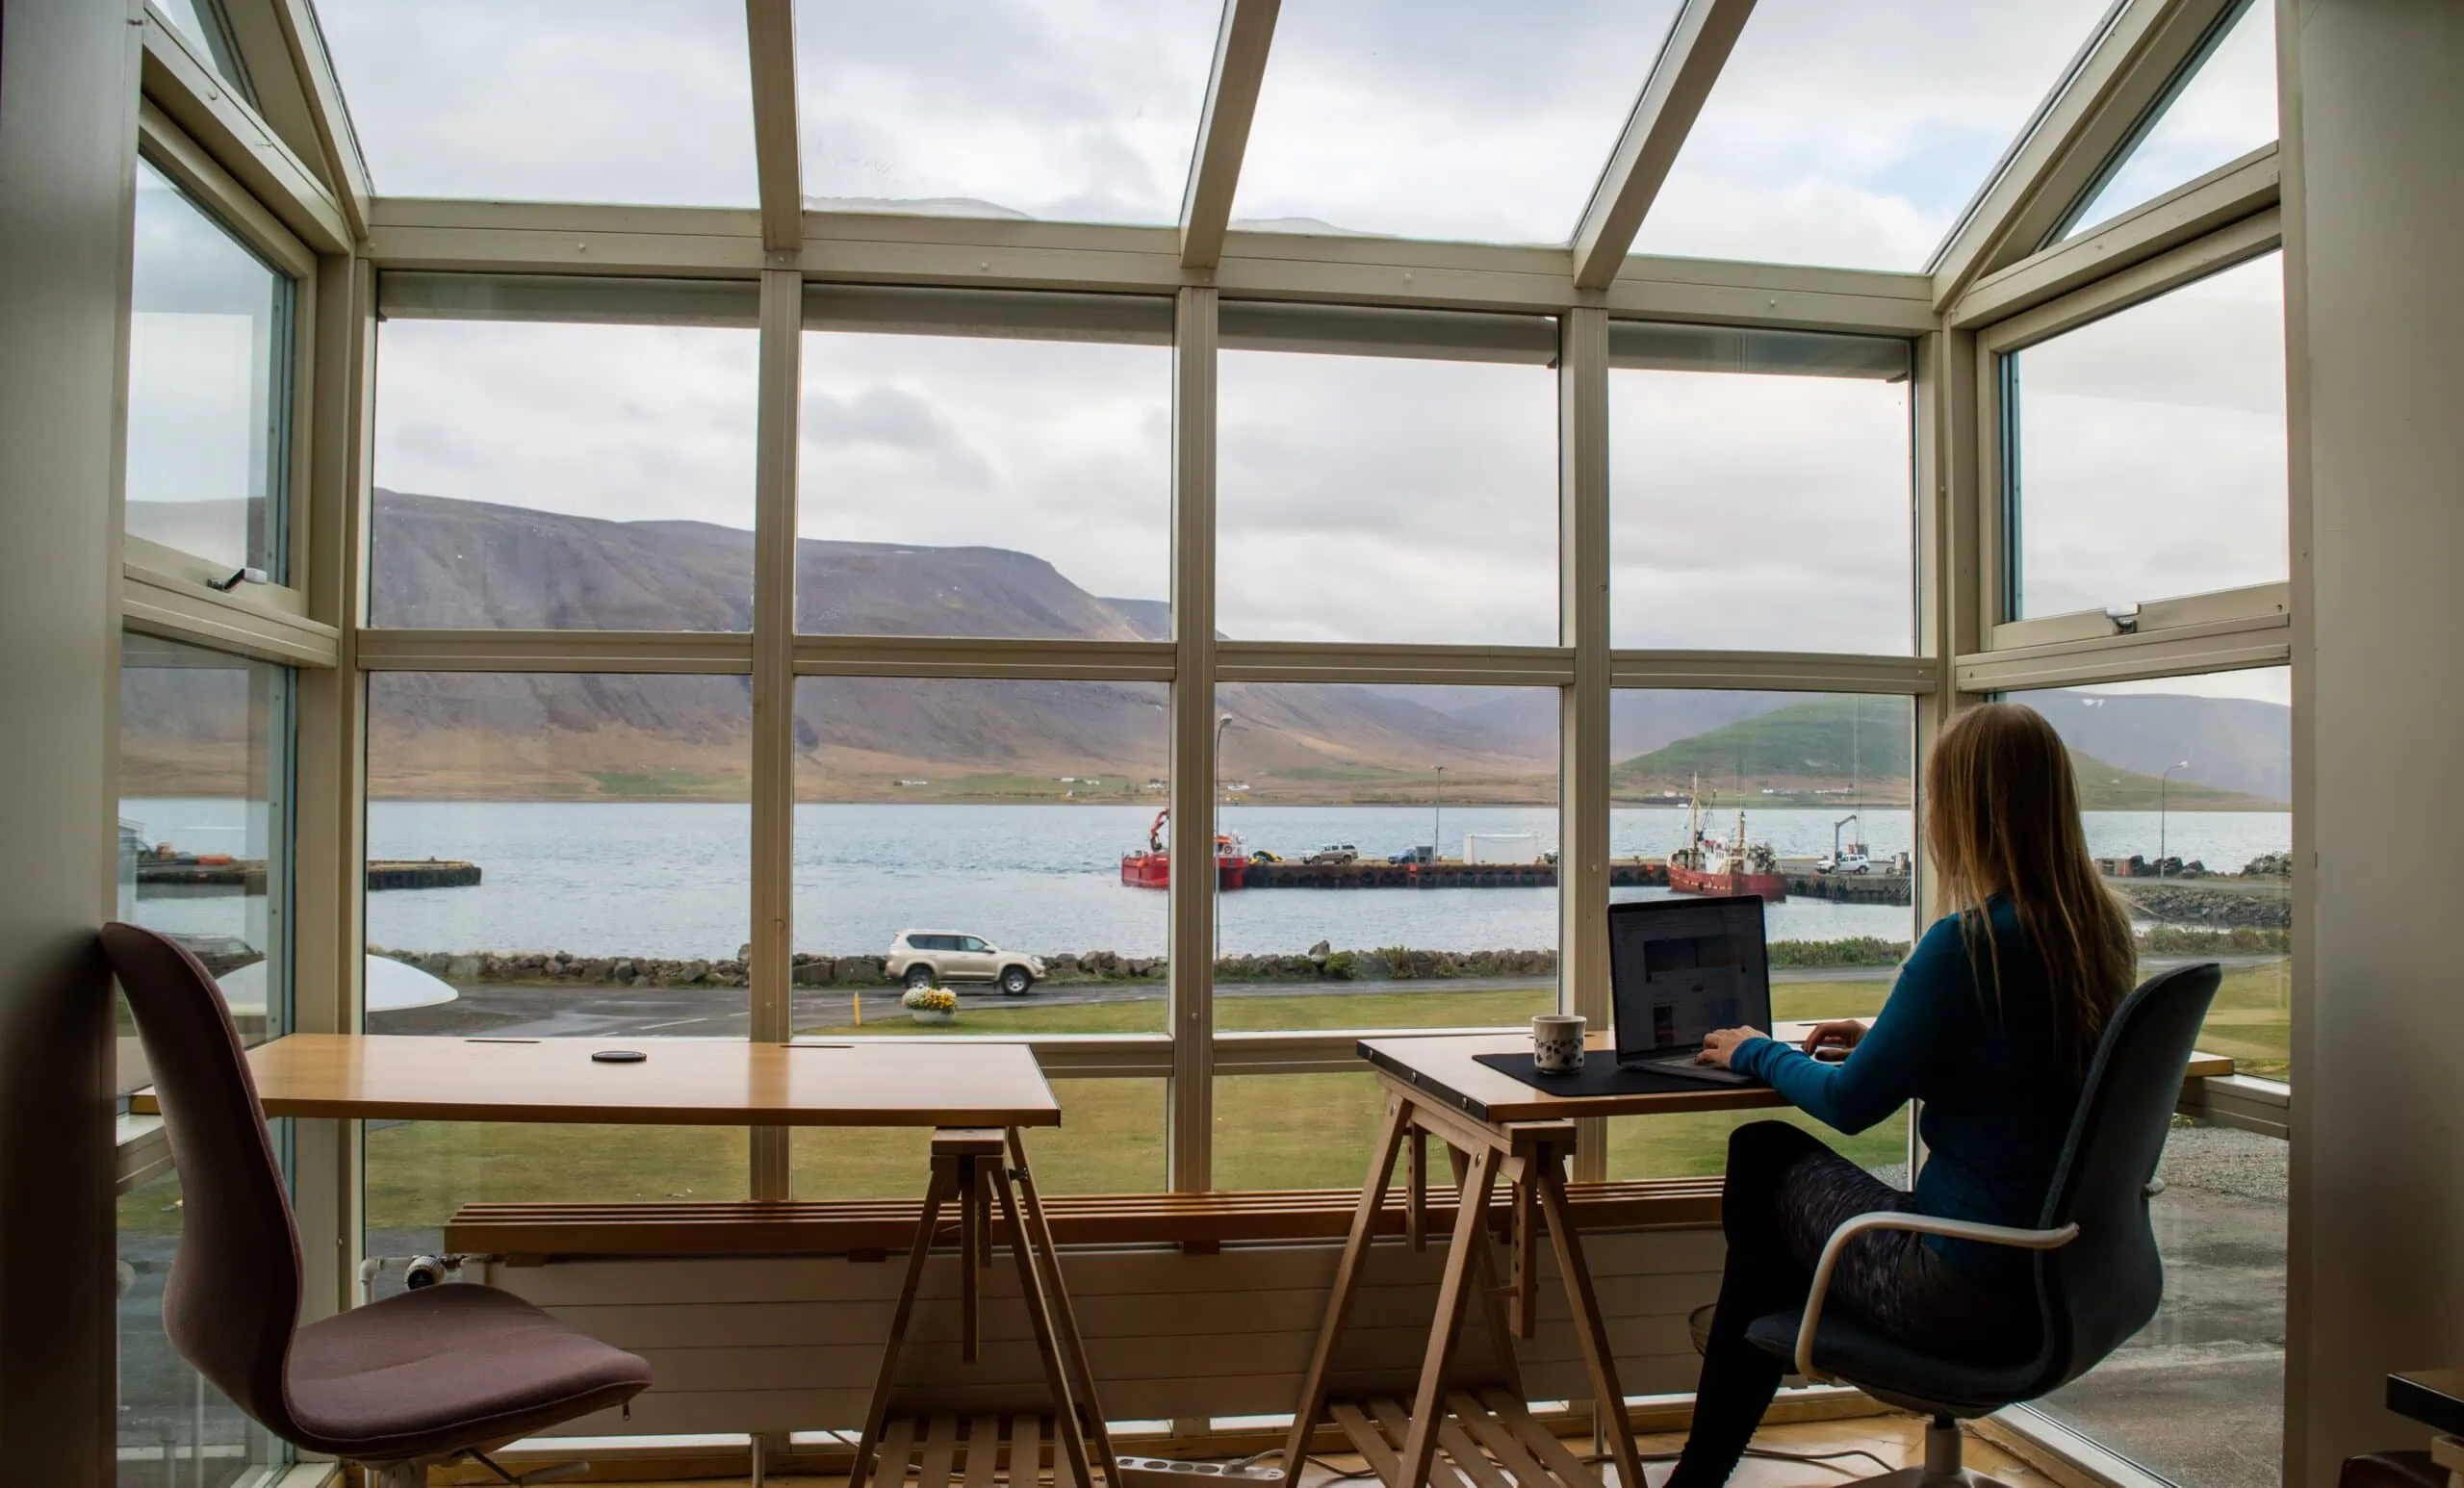 A woman manages IT services at a desk with a large window view.